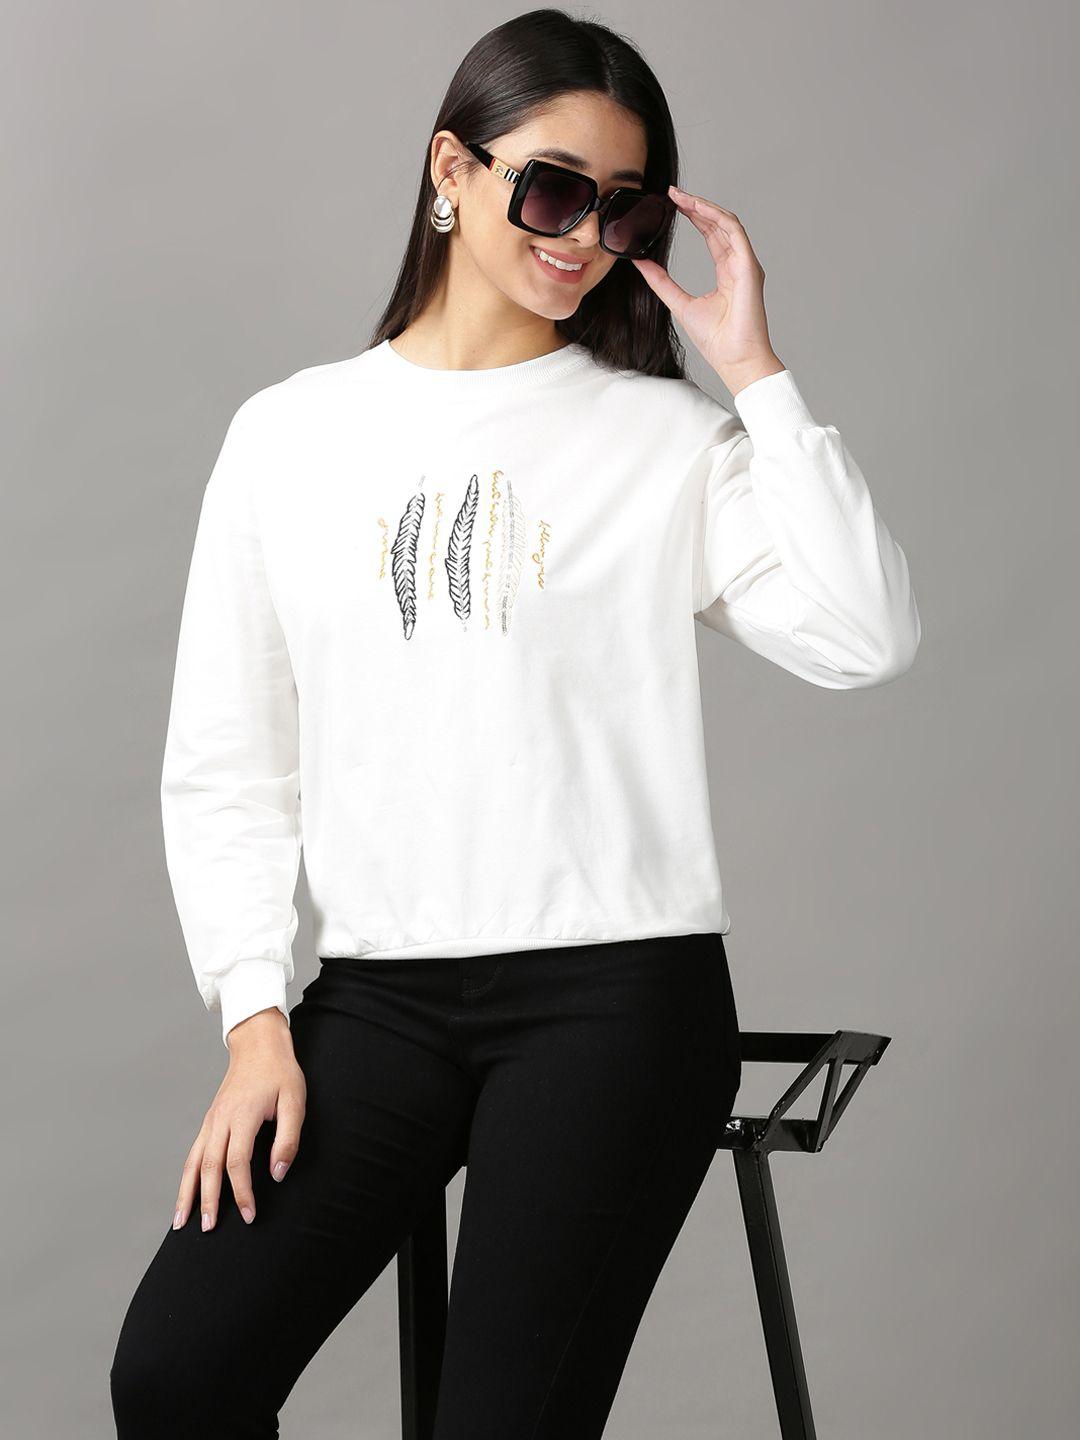 showoff-women-white-&-black-embroidered-top